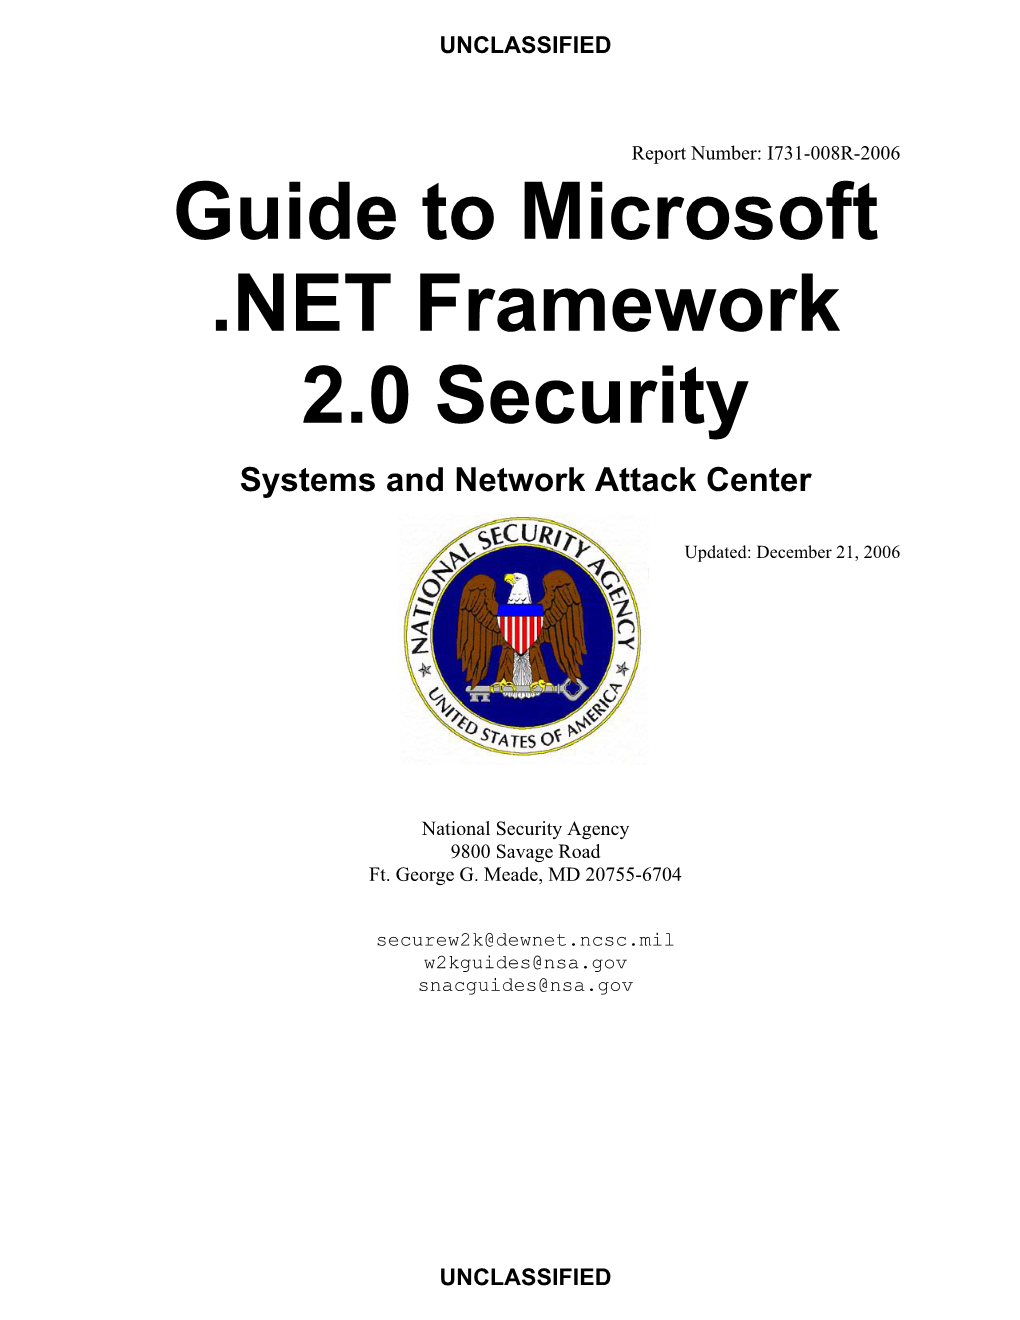 Guide to Microsoft Framework 2.0 Security Systems and Network